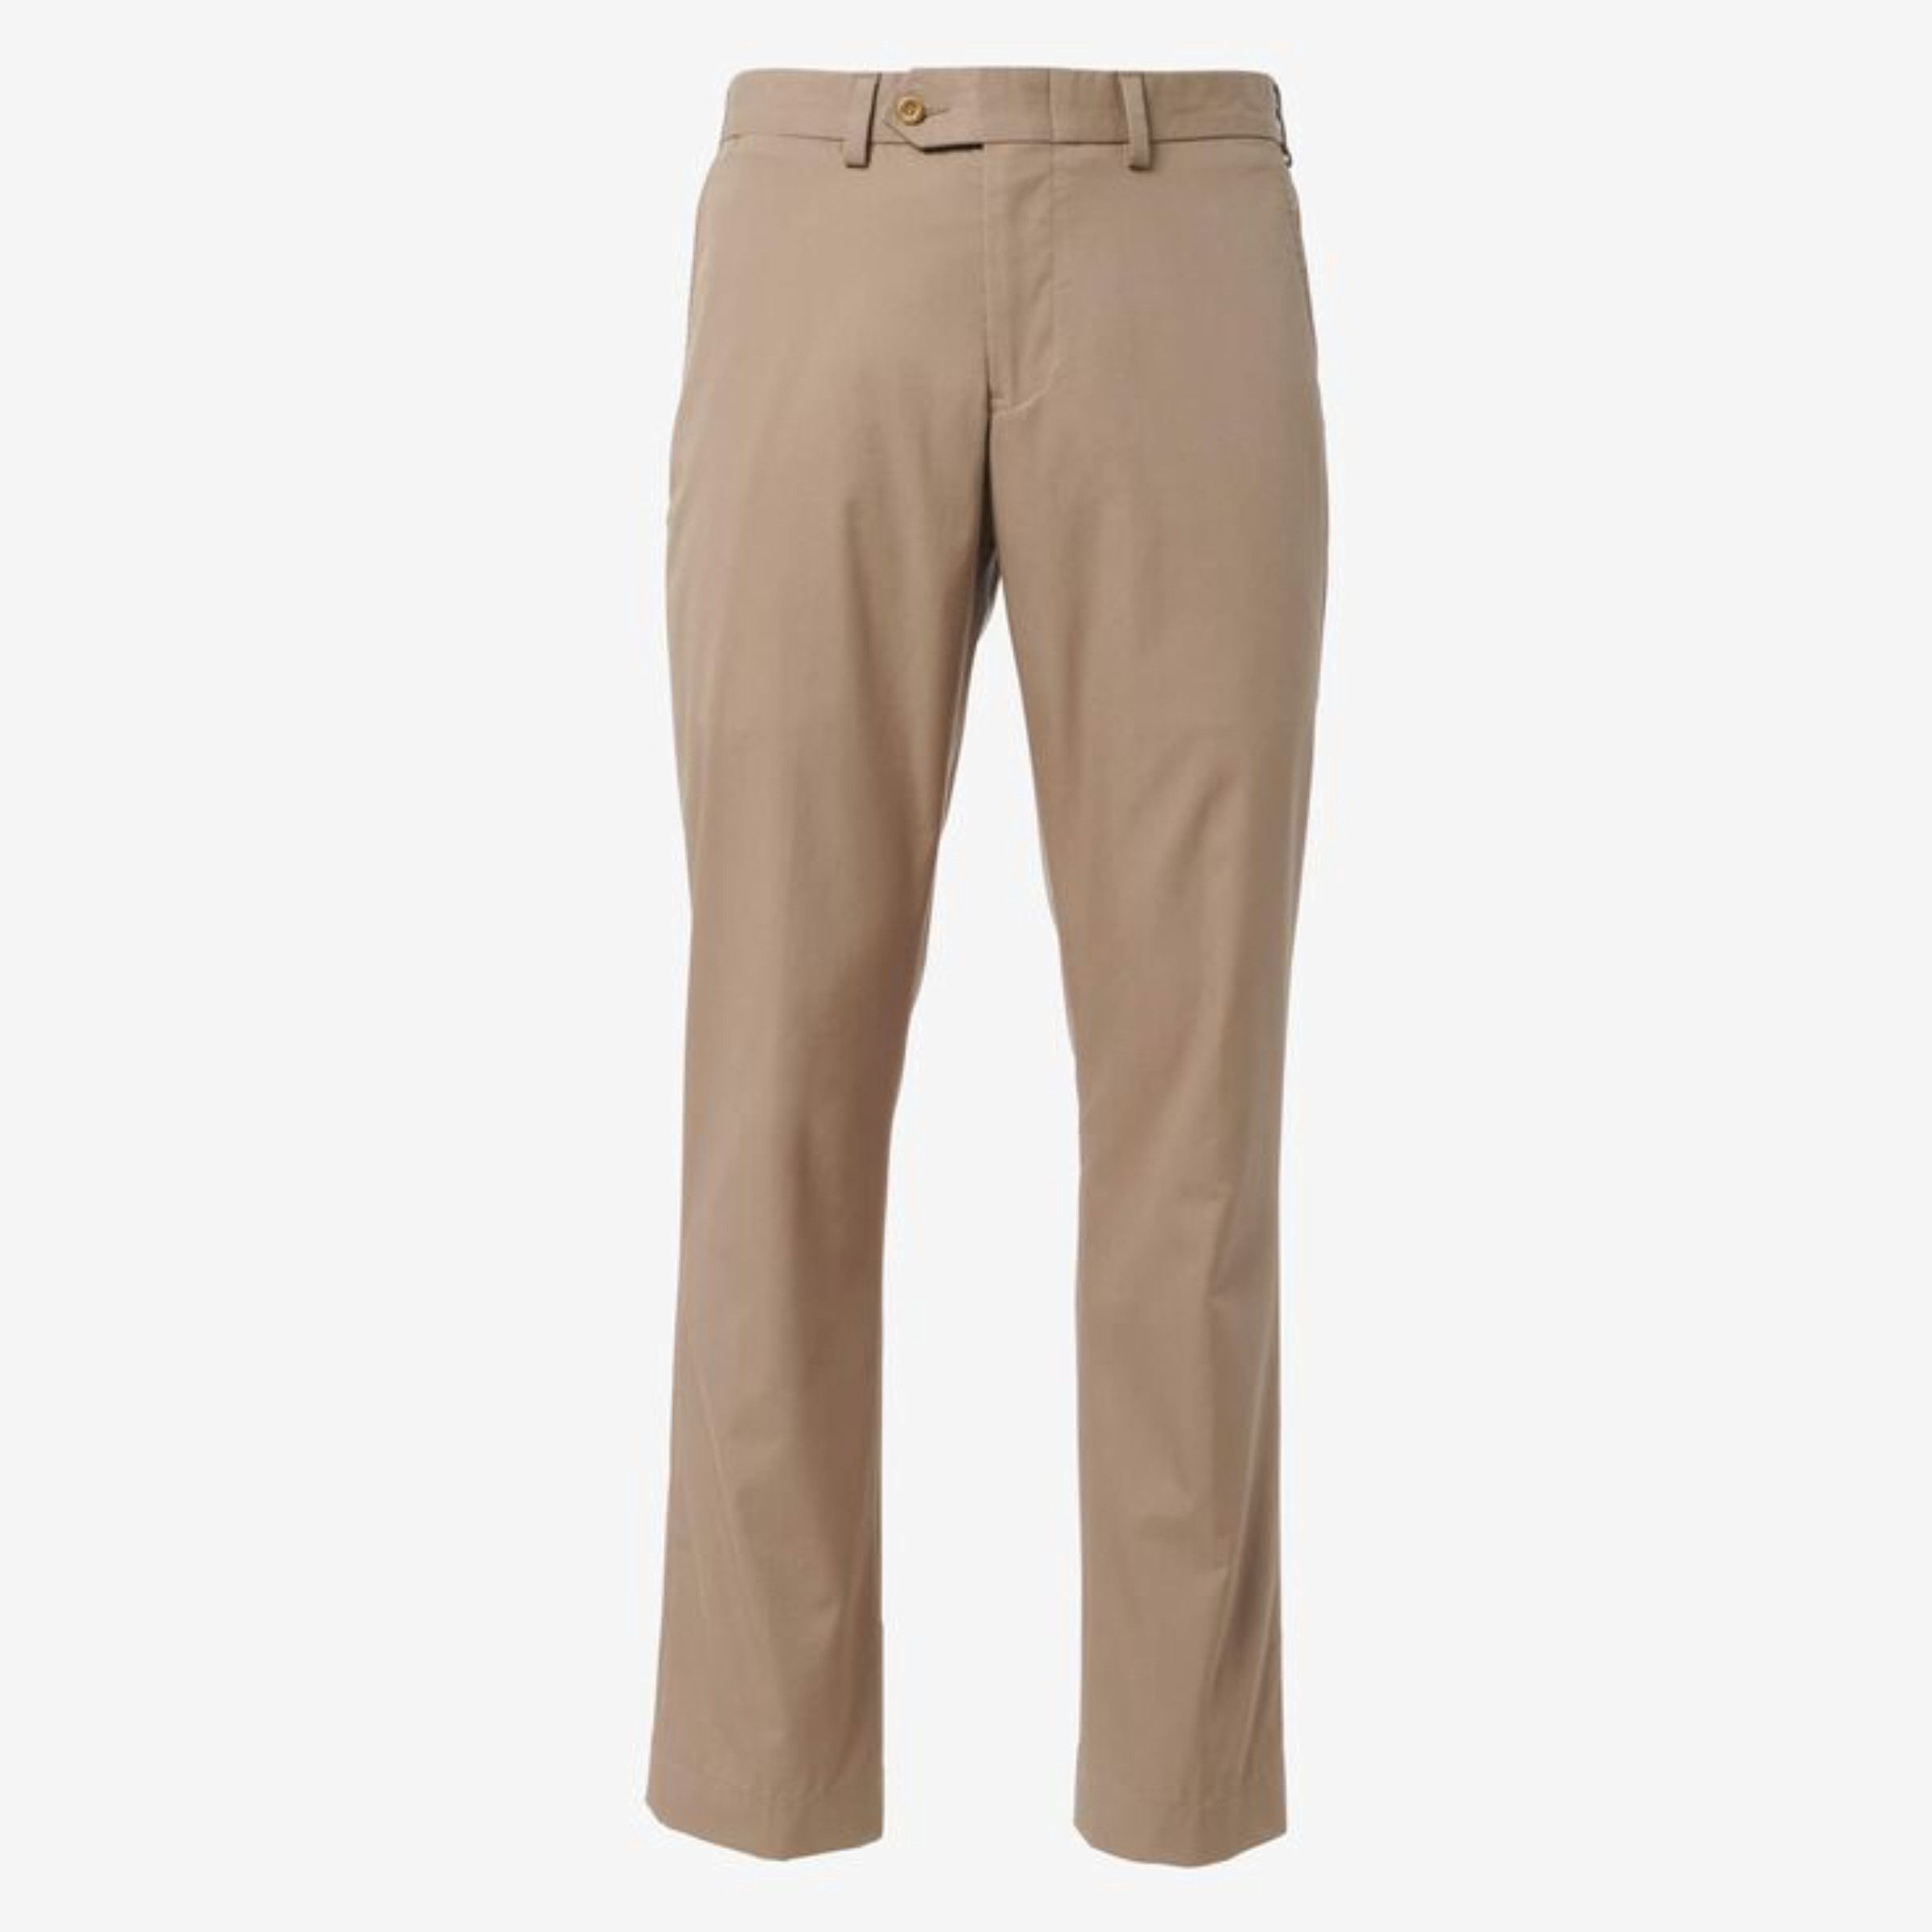 Men's Wrinkle-Free Stretch Twill Pants - and TravelSmith Travel Solutions  and Gear